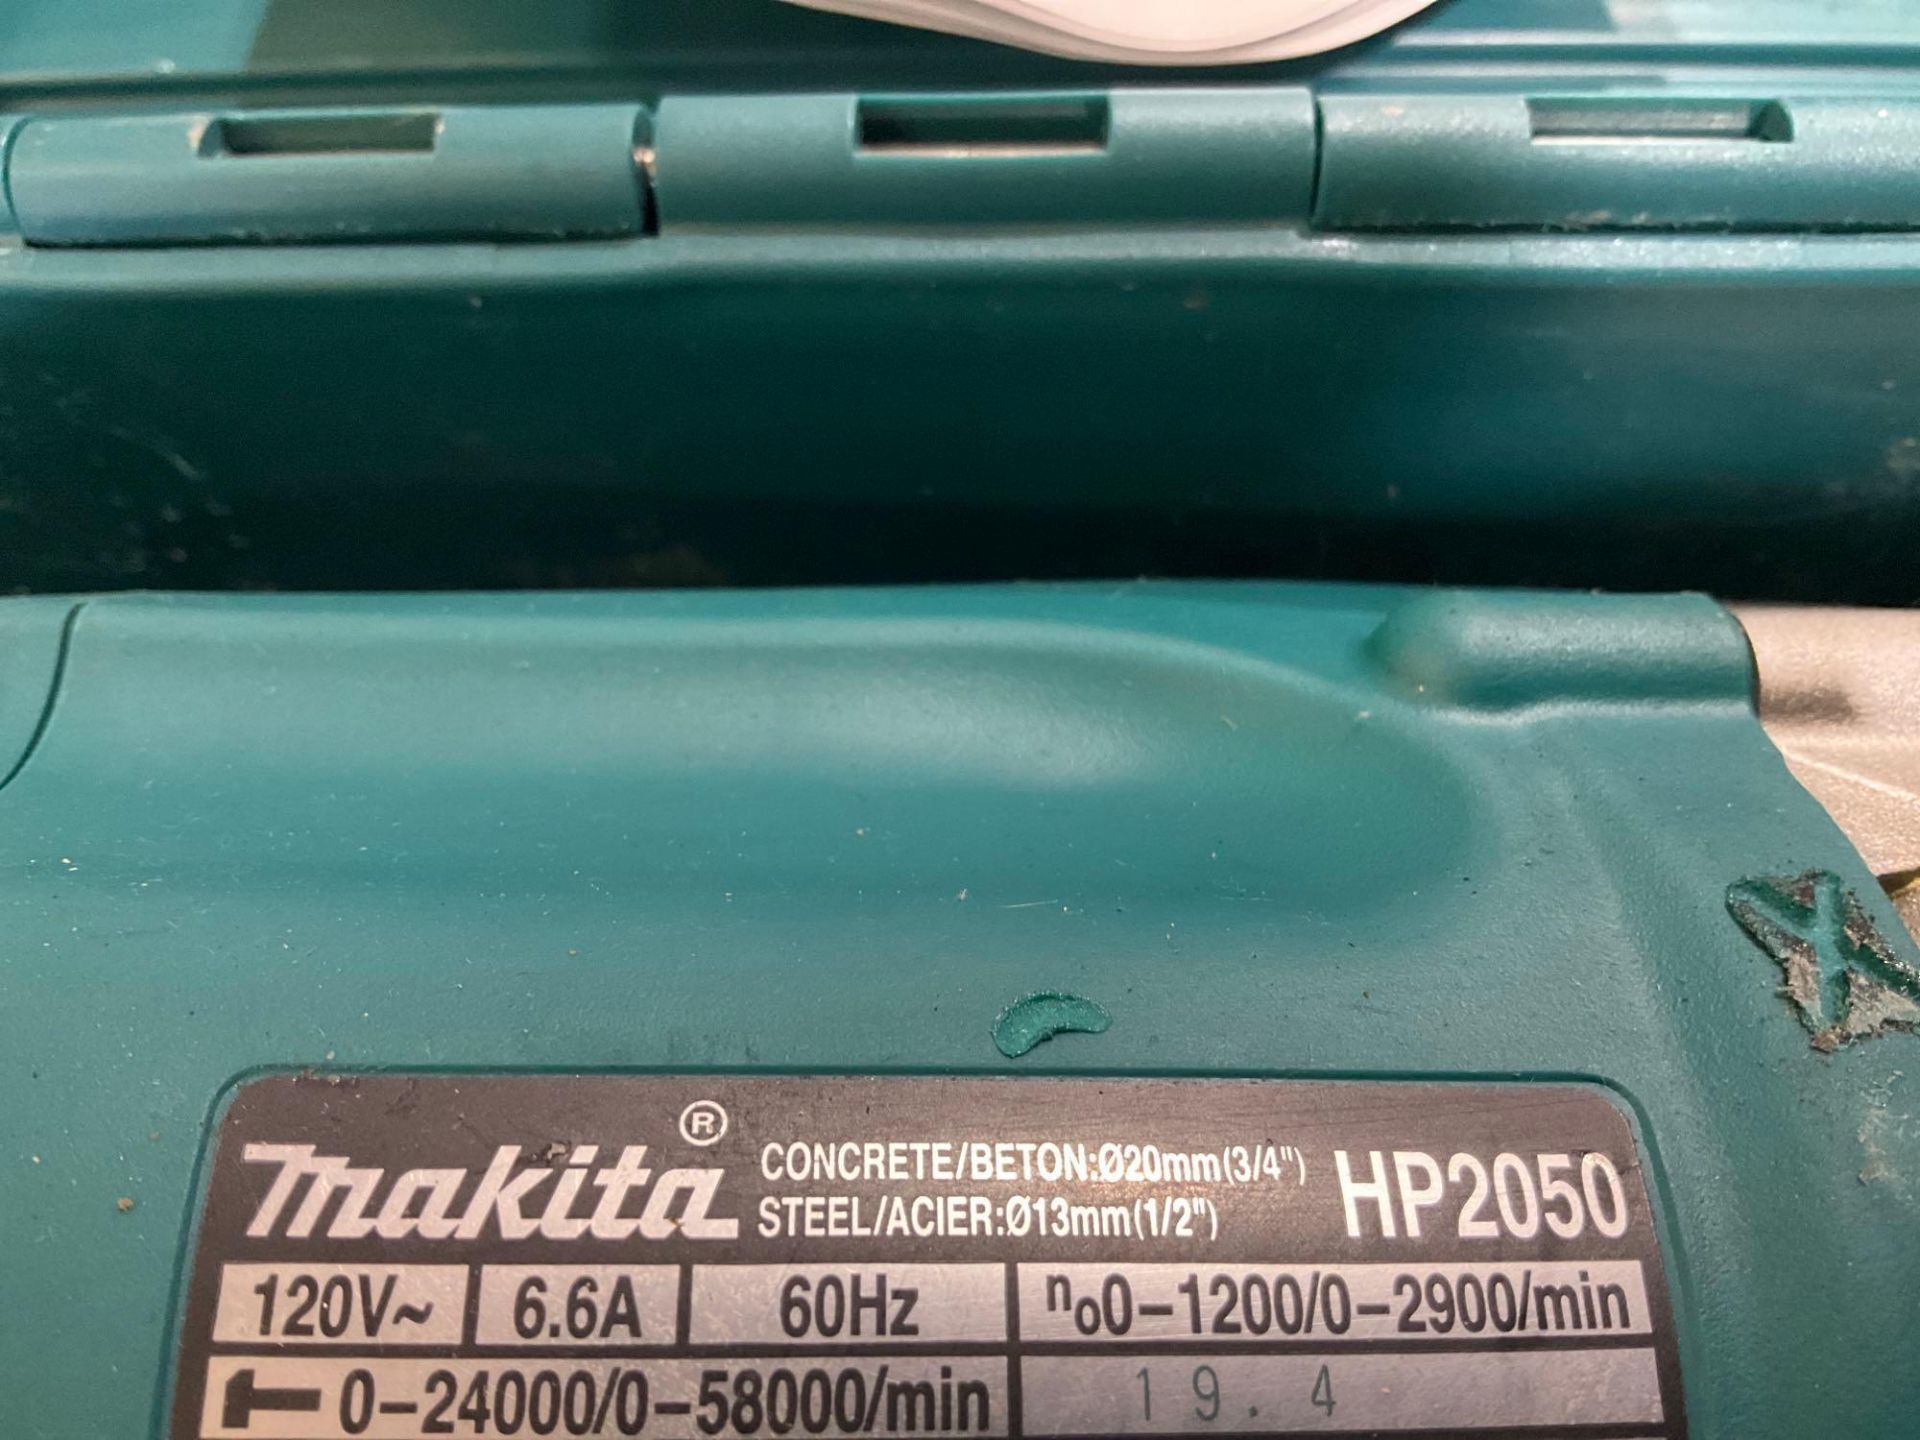 MAKITA 2 SPEED HAMMER DRILL MODEL HP2050WITH CARRYING CASE , RECONDITIONED, APPROX 120VOLTS, APPROX - Image 5 of 6